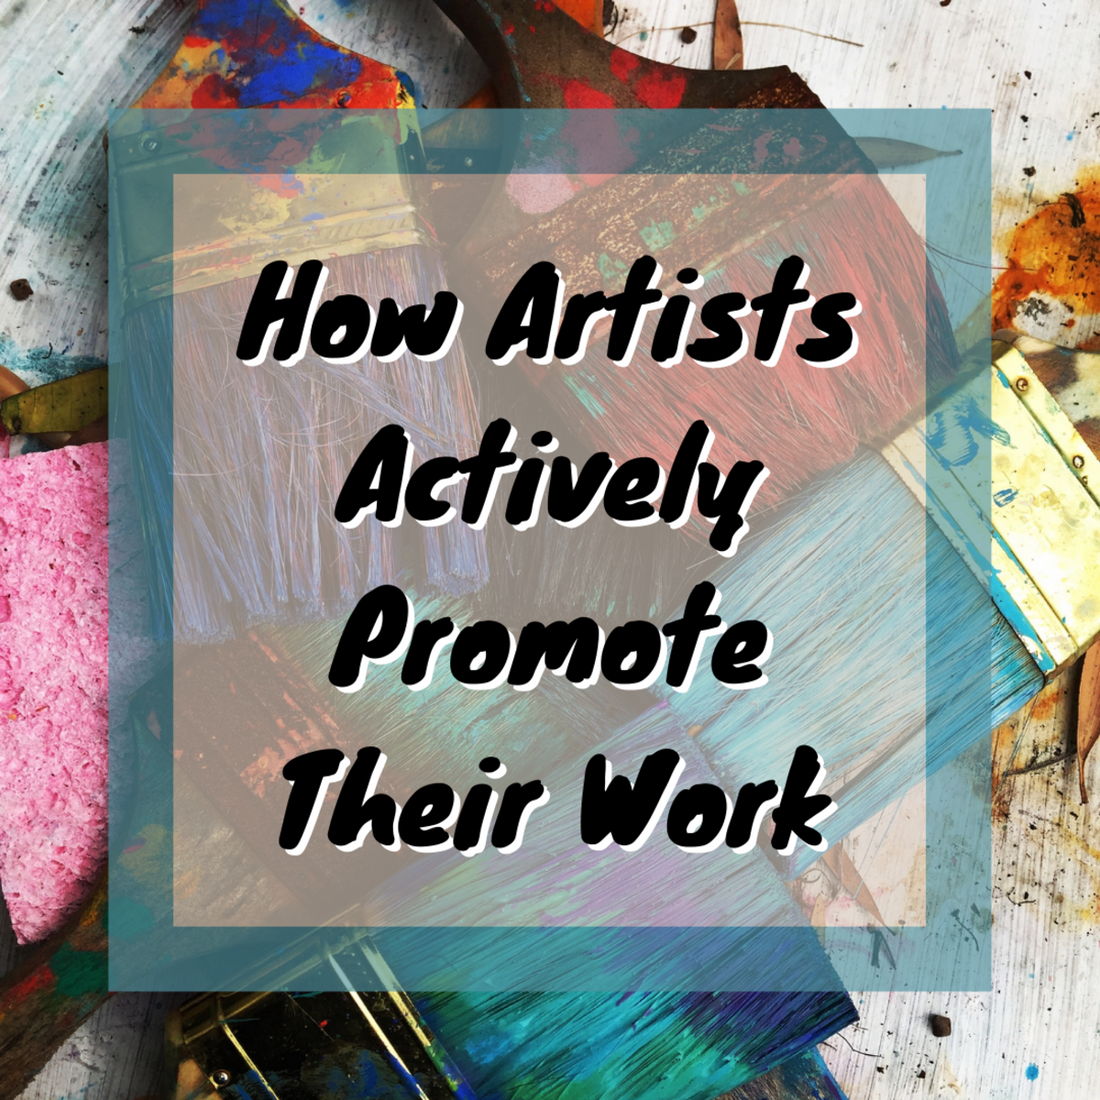 What are some effective strategies for promoting and marketing art online?